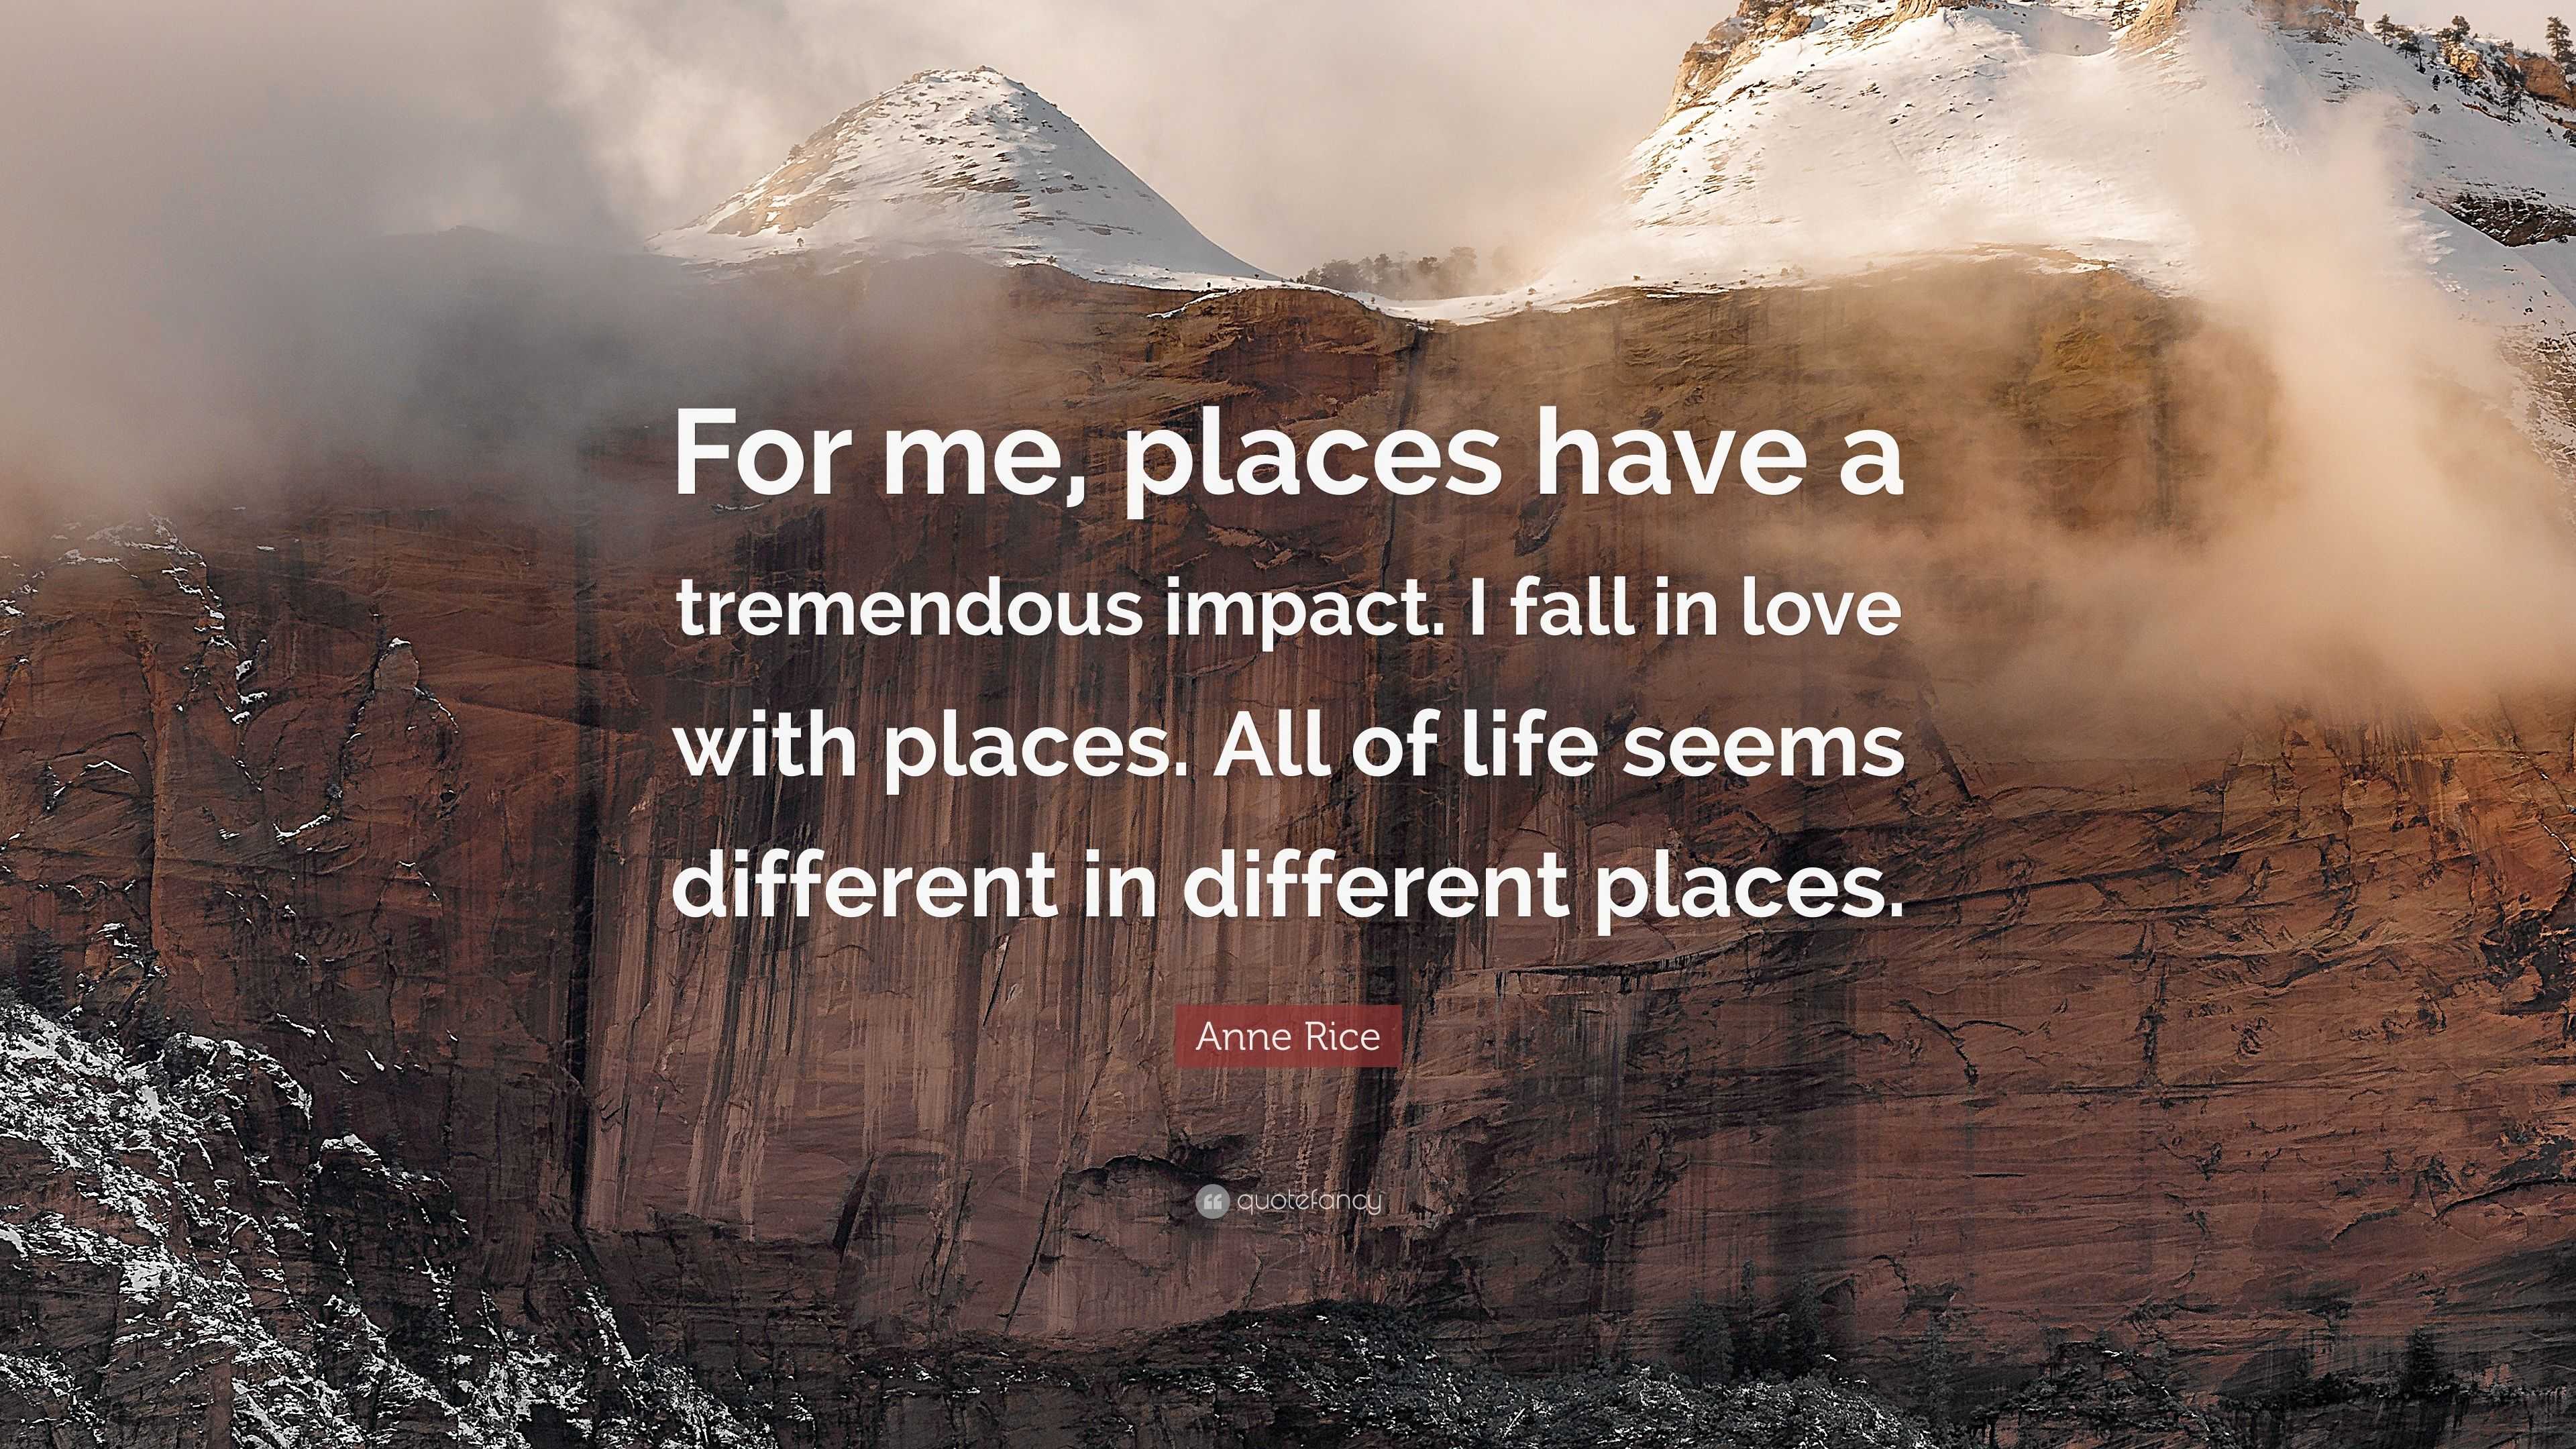 Anne Rice Quote: “For me, places have a tremendous impact. I fall in